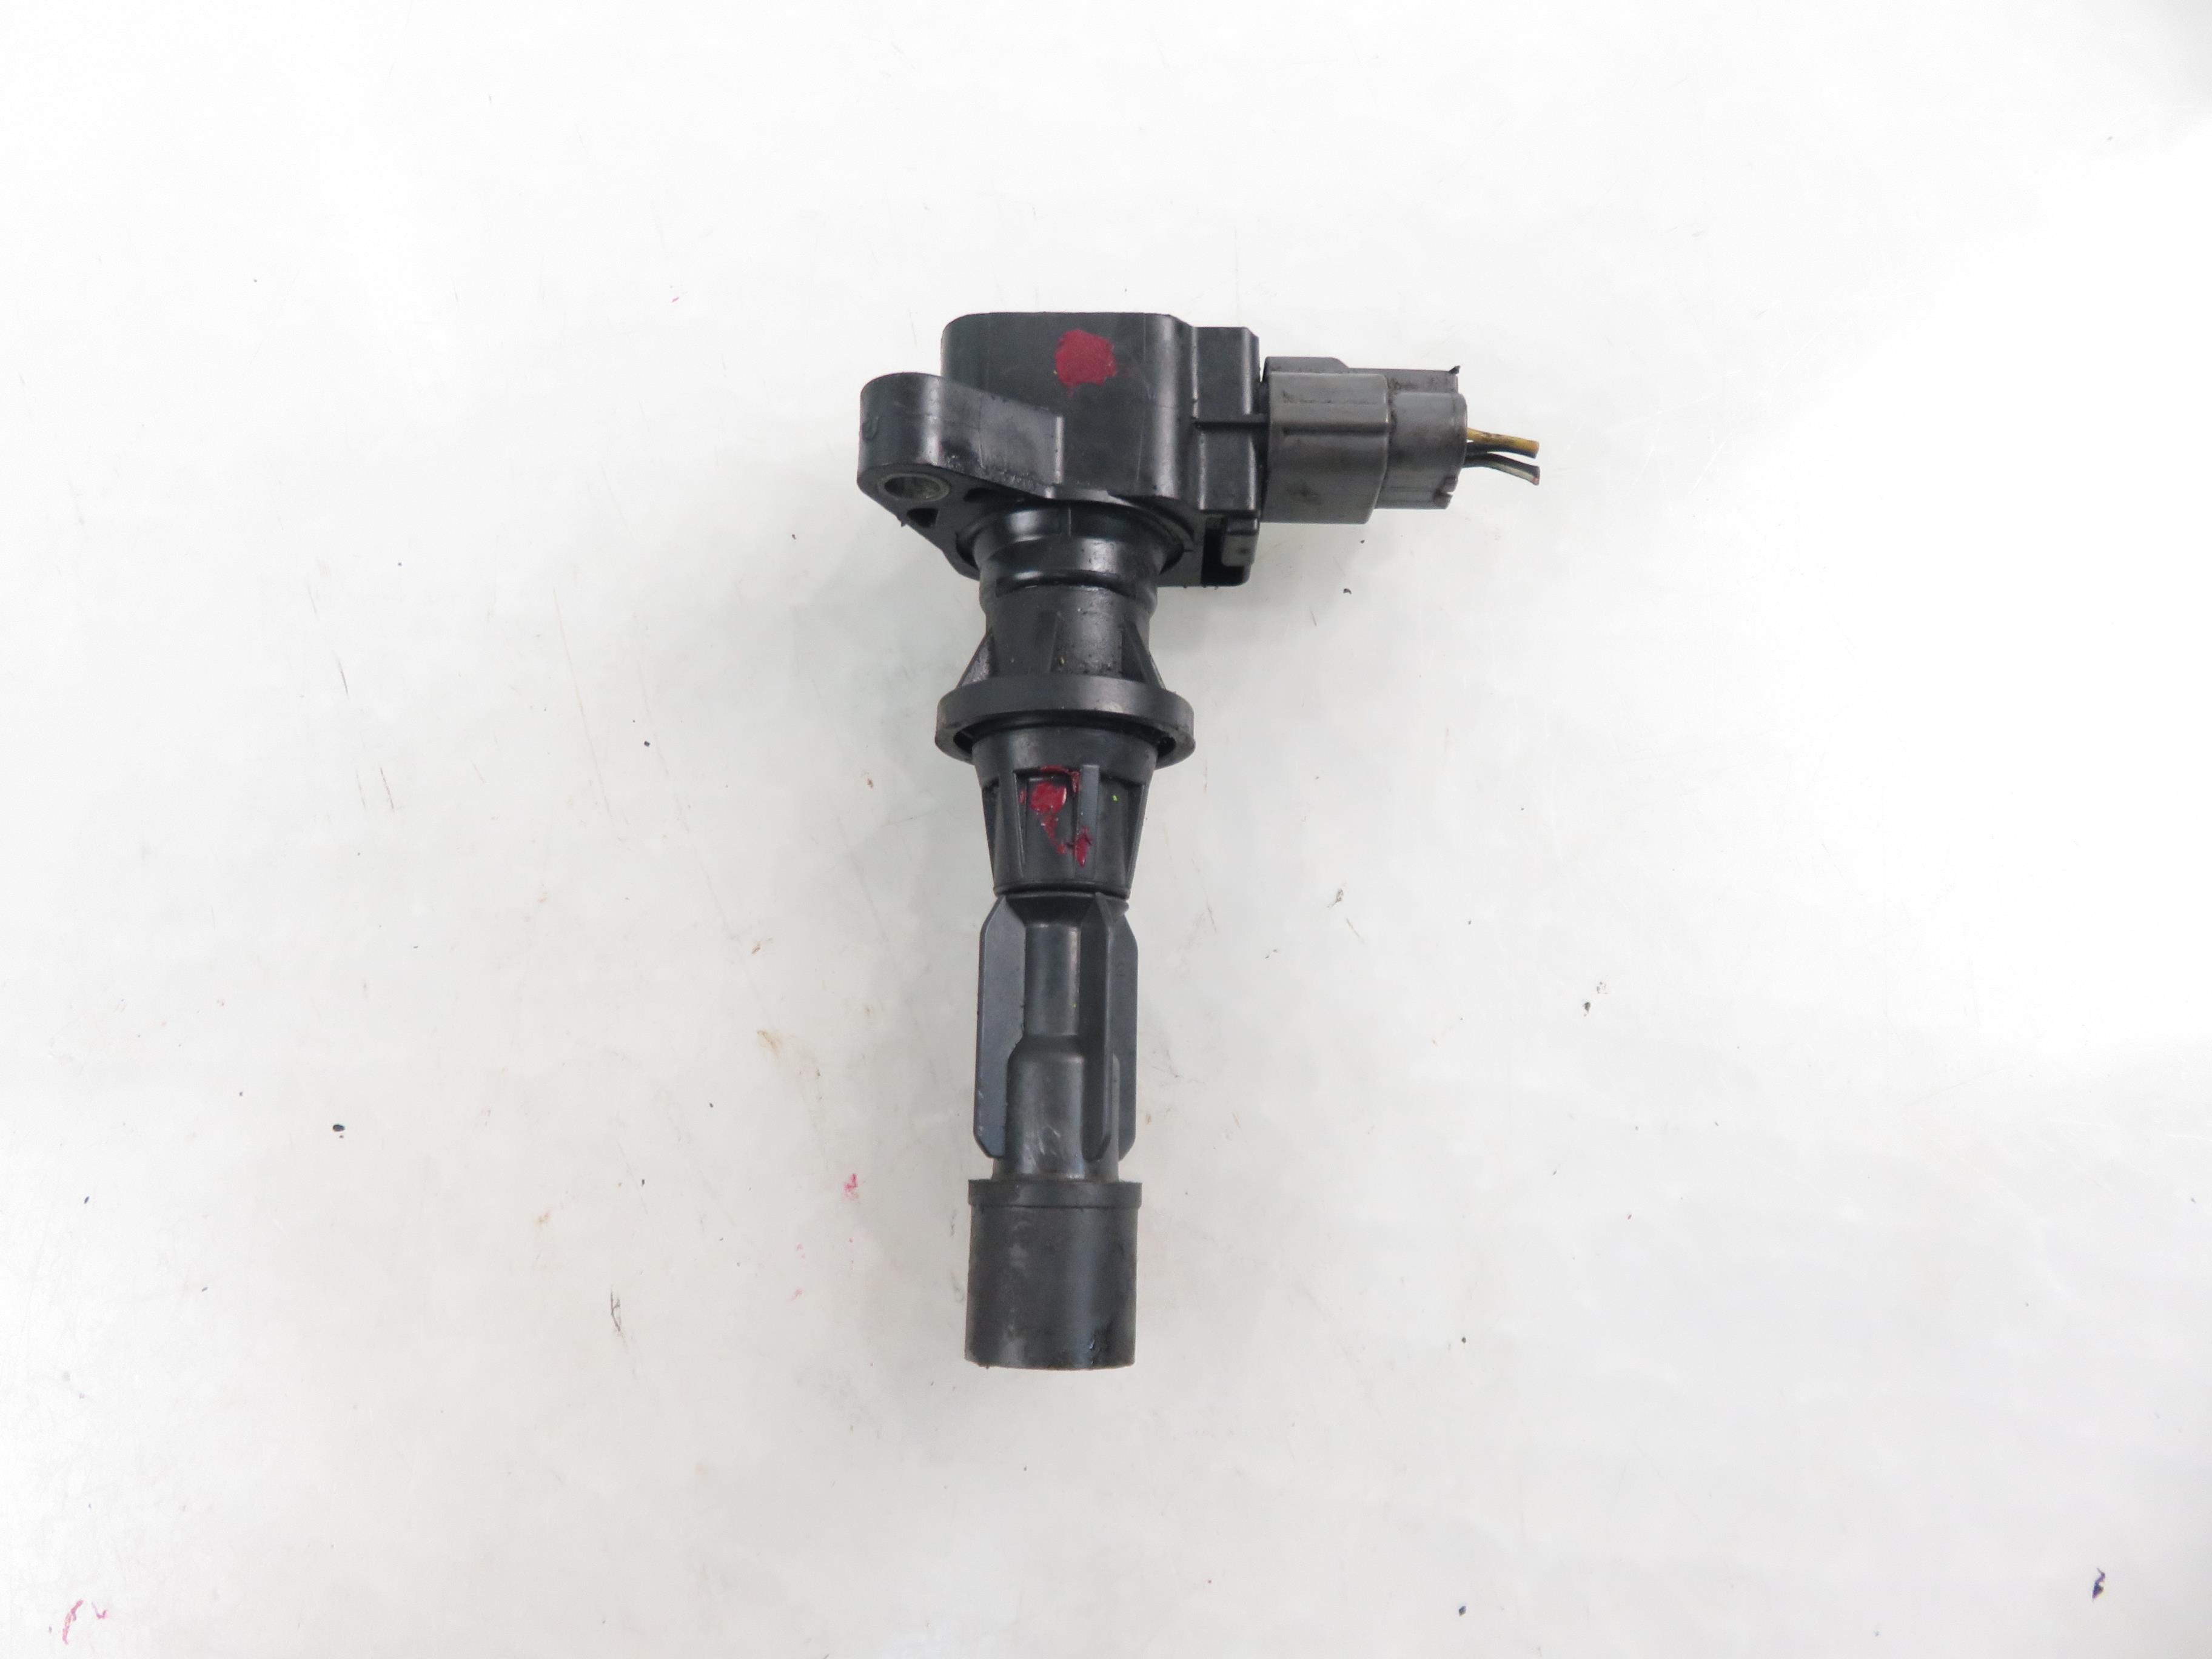 MAZDA 6 GG (2002-2007) High Voltage Ignition Coil 0997001062, 6M8G12A366 22981972